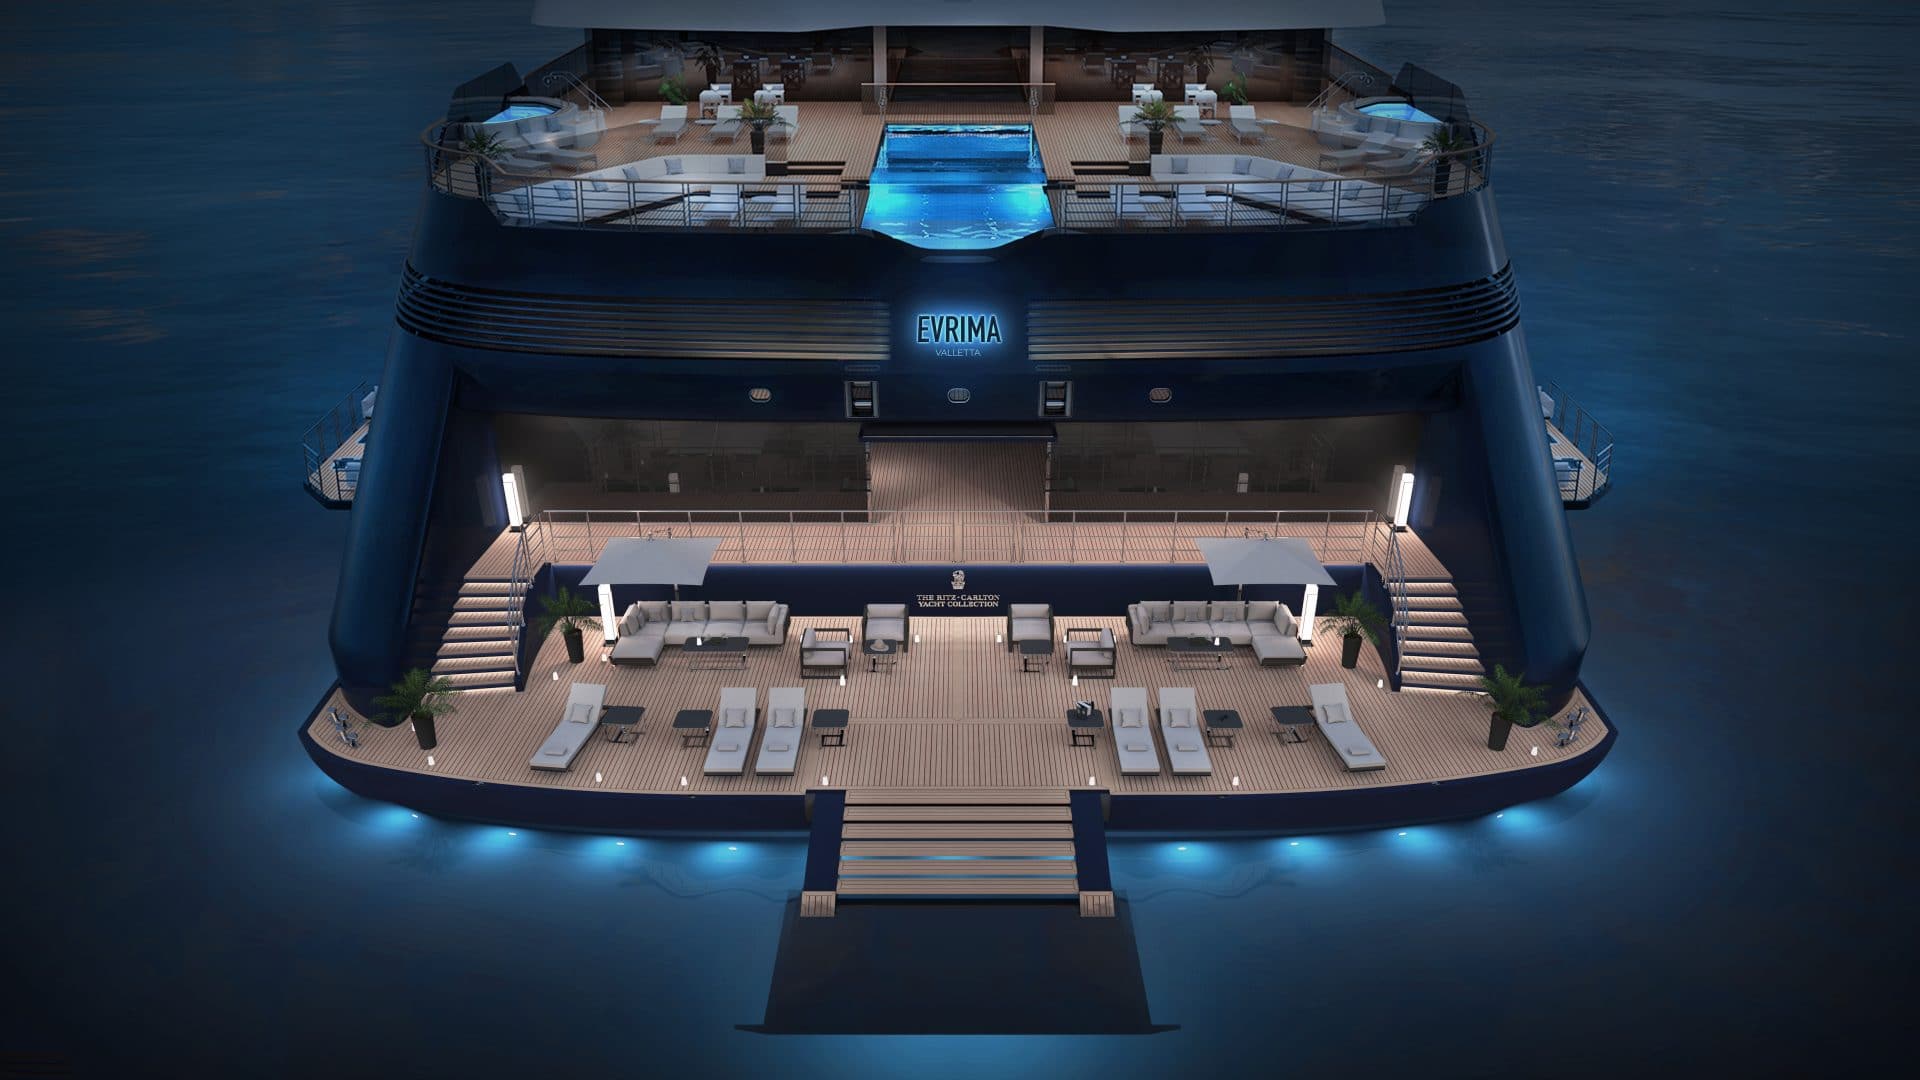 Evrima: what you need to know about Ritz-Carlton's first 190m Superyacht Cruise - Yacht Harbour